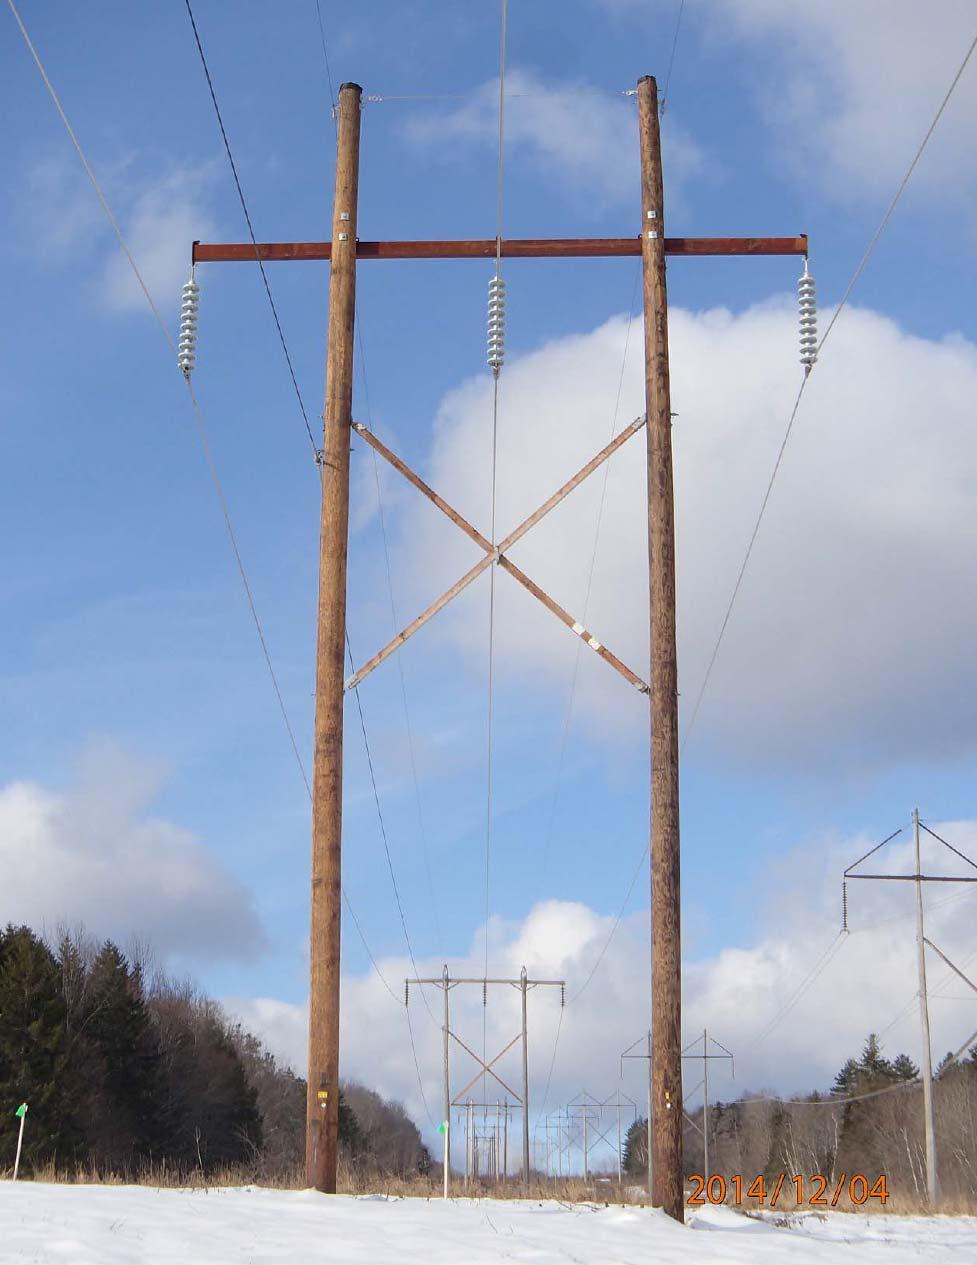 Aesthetic Analysis Report Figure 4: View of recent 115 kv replacement structure in foreground, with an existing structure similar to those on the K31 line in the background.